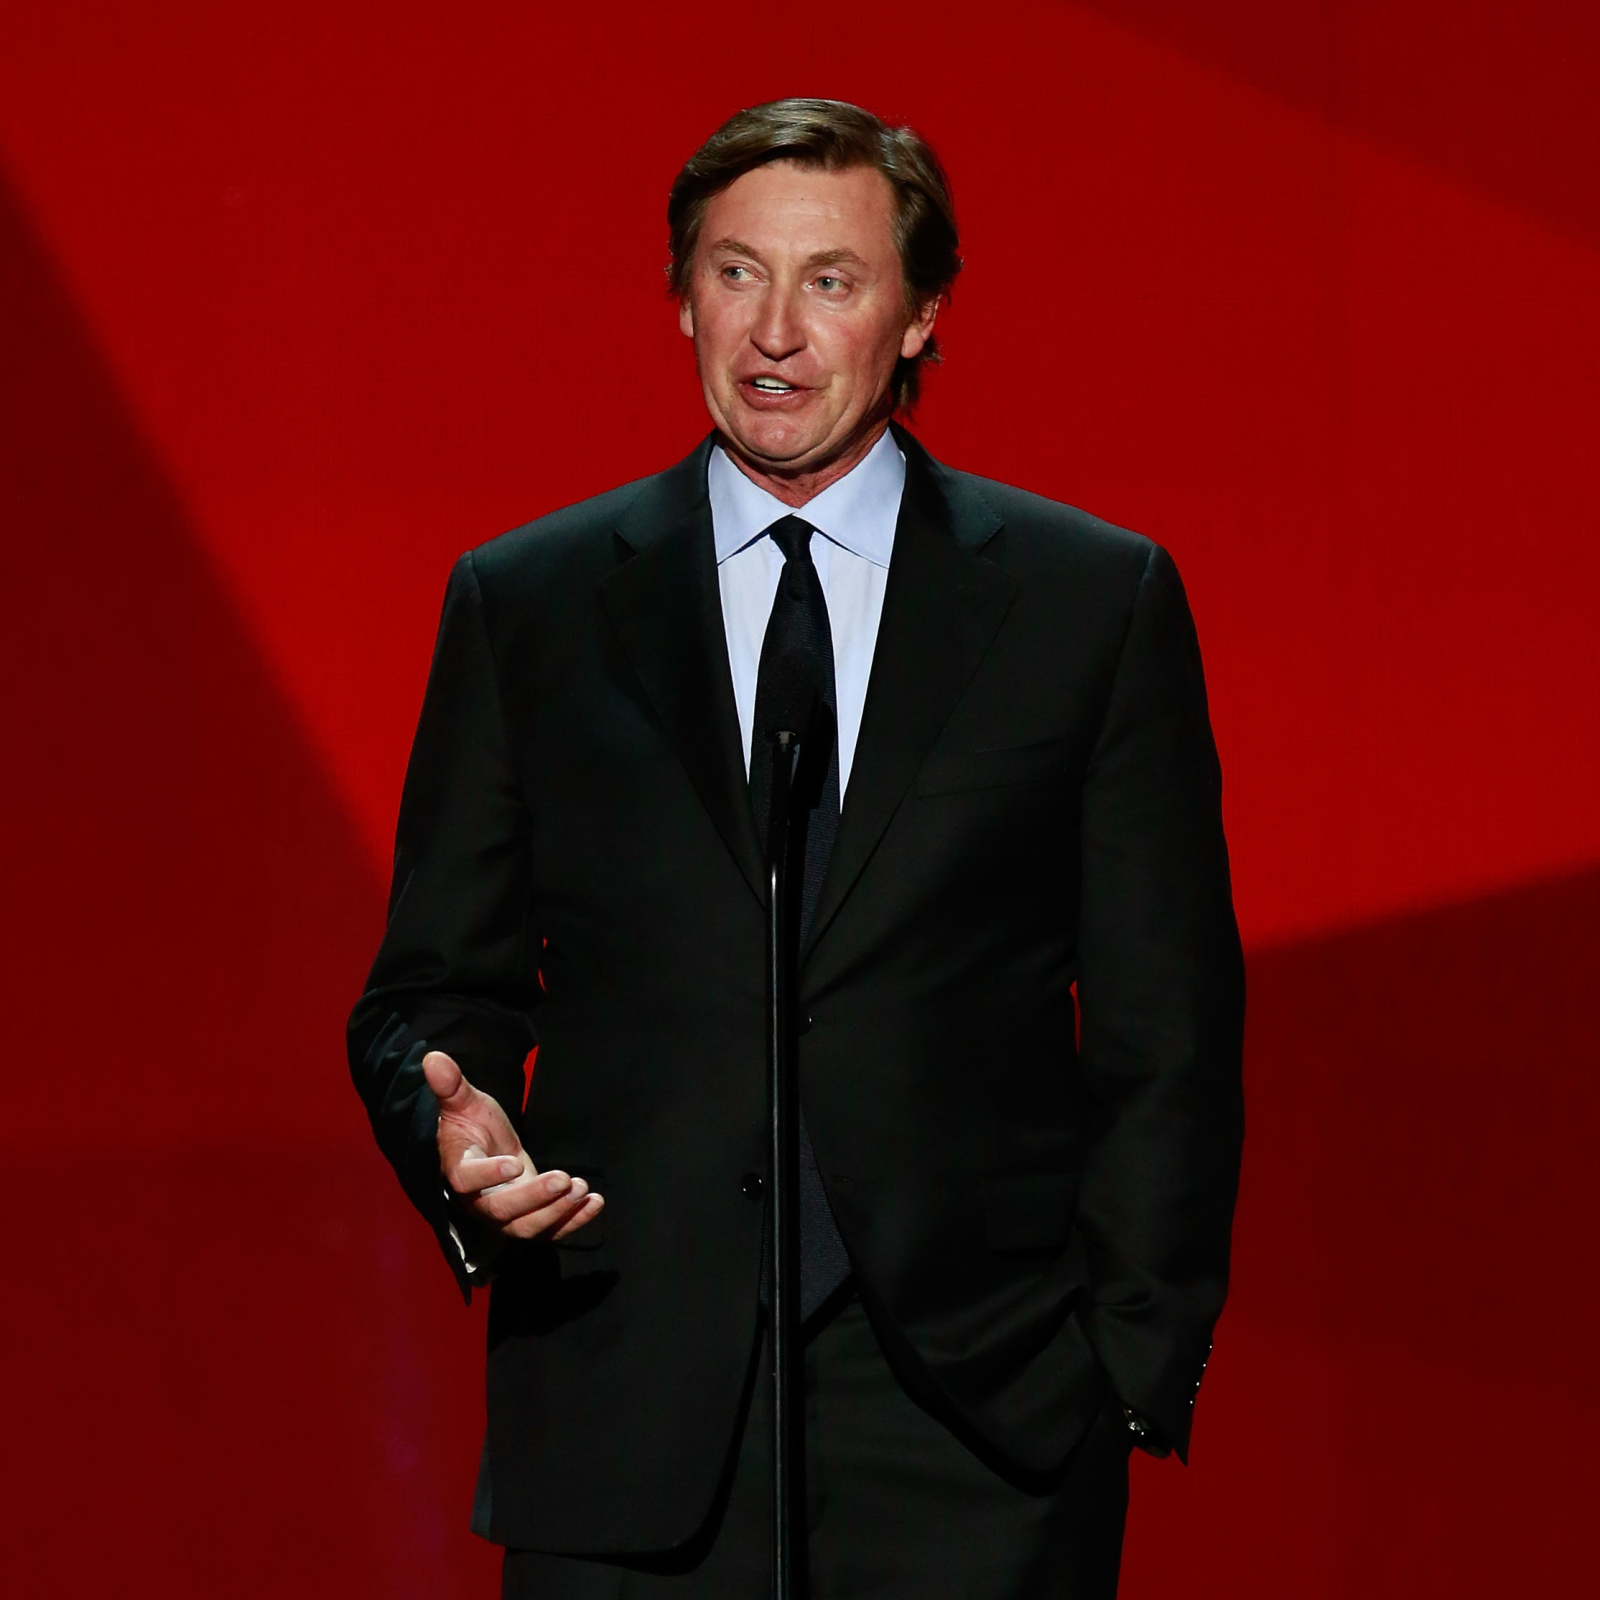 Wayne Gretzky Stanley Cup jersey sells for record $1.45M - Sports